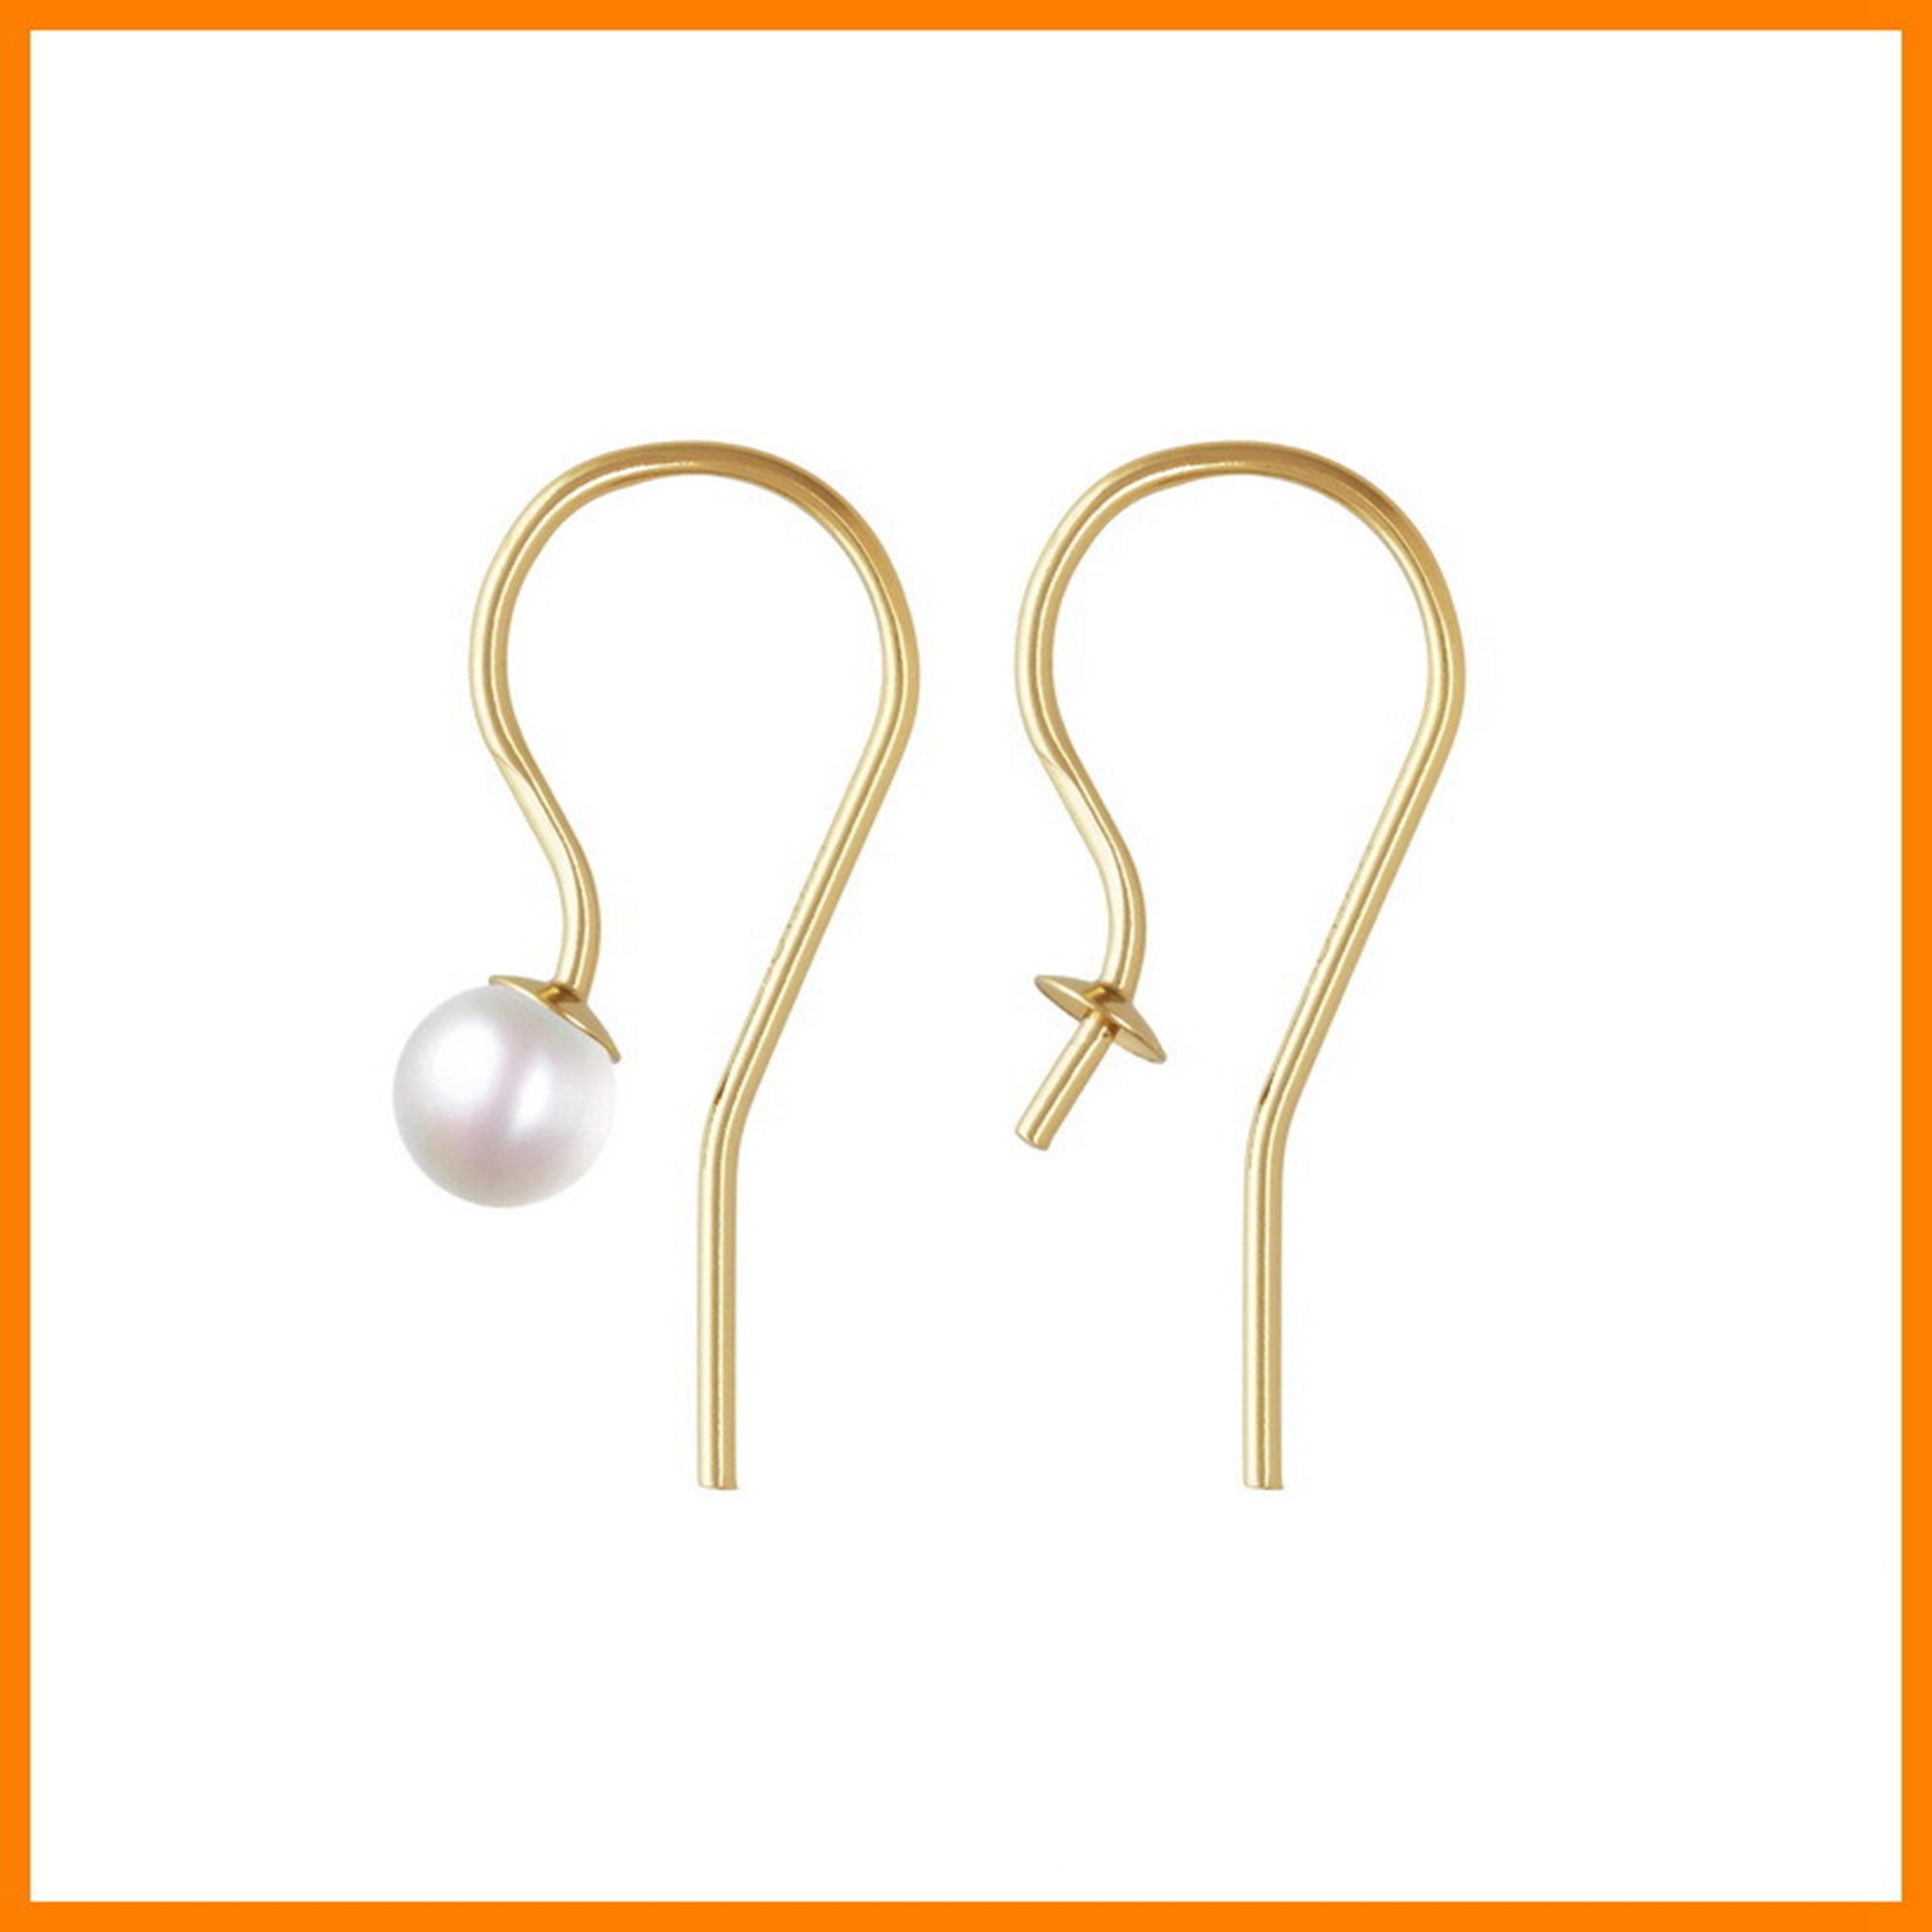 Silver Spiral Earring Hooks With Cup and Peg for Half Drilled Pearl Beads,  S925 Silver Earring Hooks for Jewelry Making, Ear Wire 